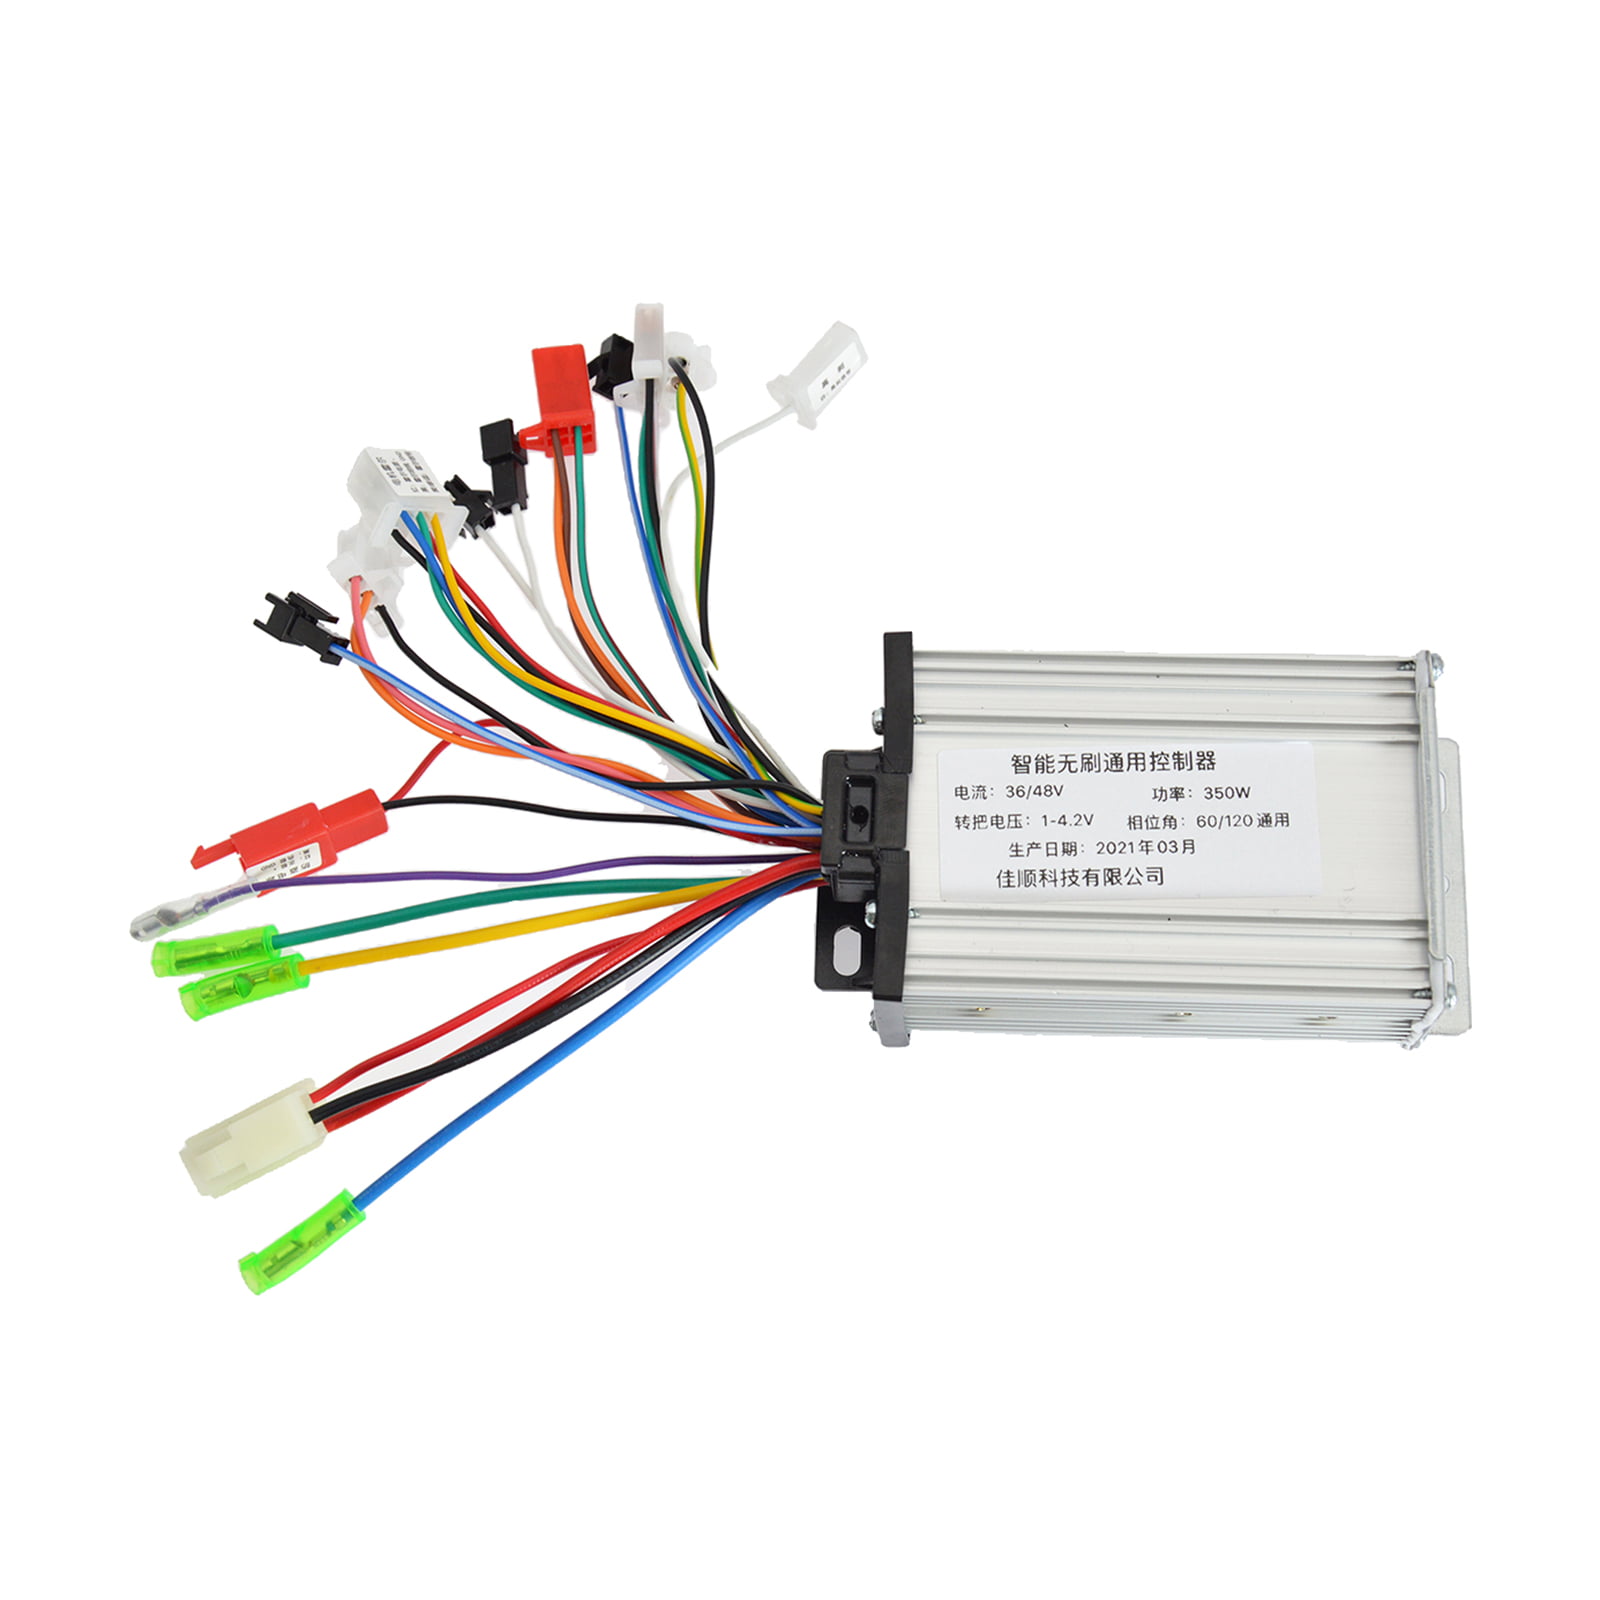 36V/48V 350W Electric Bicycle E-bike Scooter Brushless DC Motor Speed Controller 